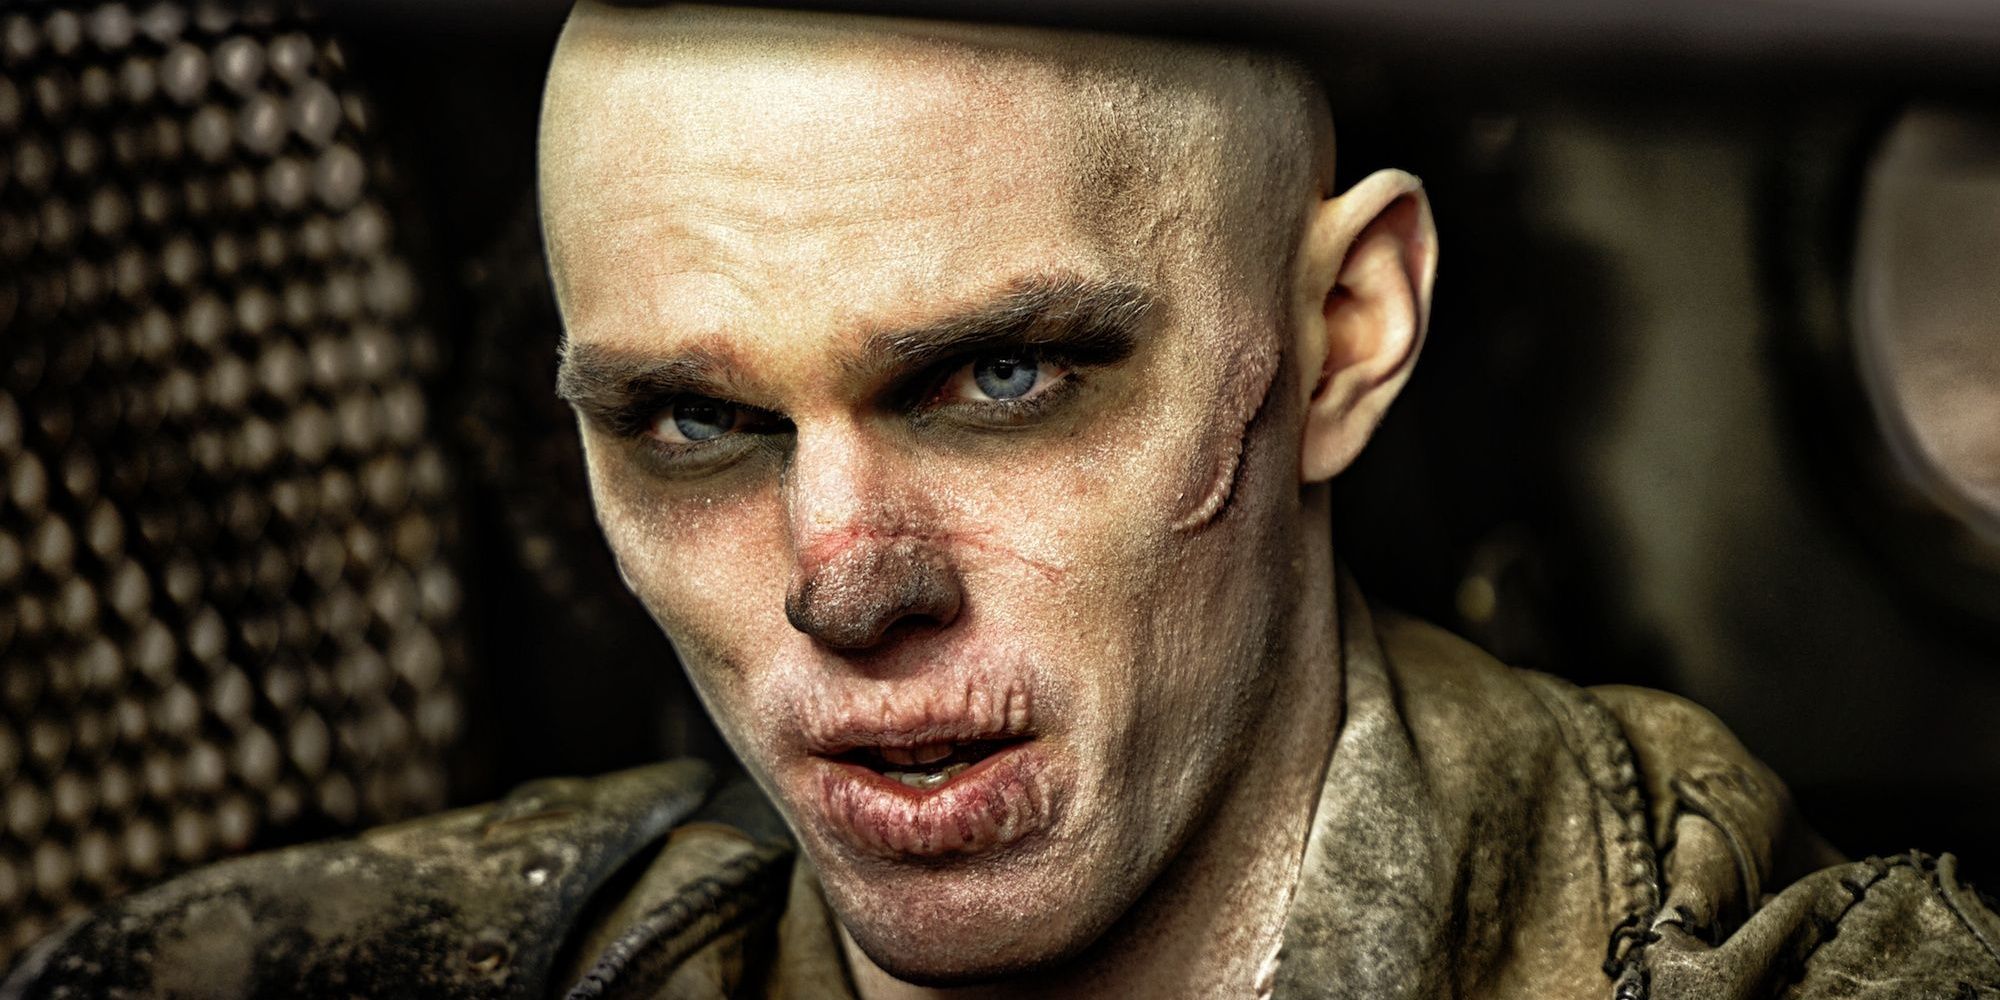 Mad Max: George Miller’s Backstory for Fury Road’s Nux Makes His Redemption Even Better